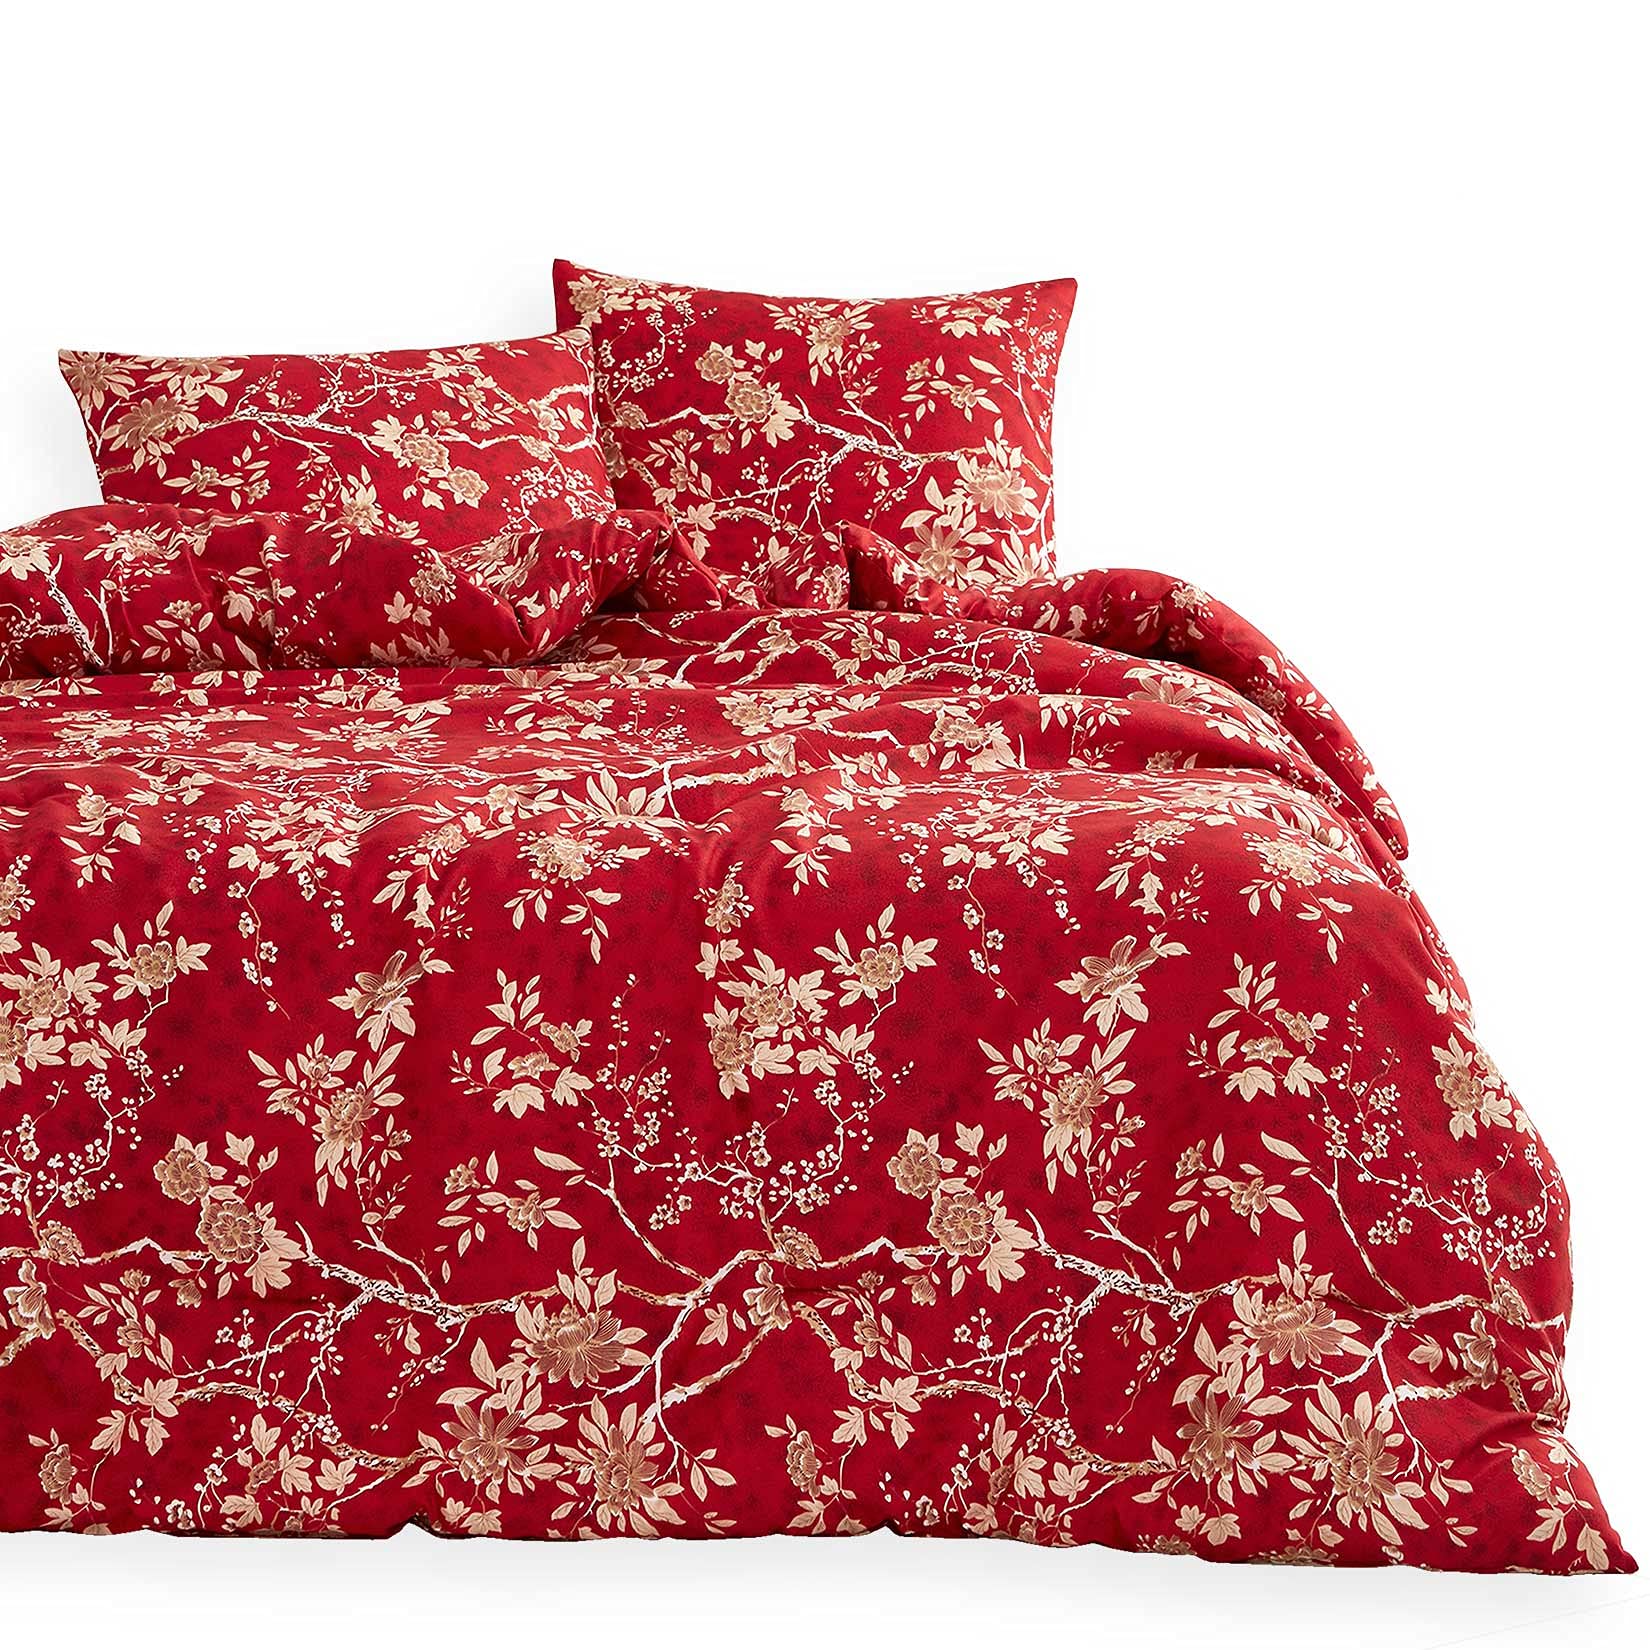 Book Cover Wake In Cloud - Red Floral Duvet Cover Set, Vintage Flowers Pattern Printed, Soft Microfiber Beddings with Zipper Closure (3pcs, Queen Size)